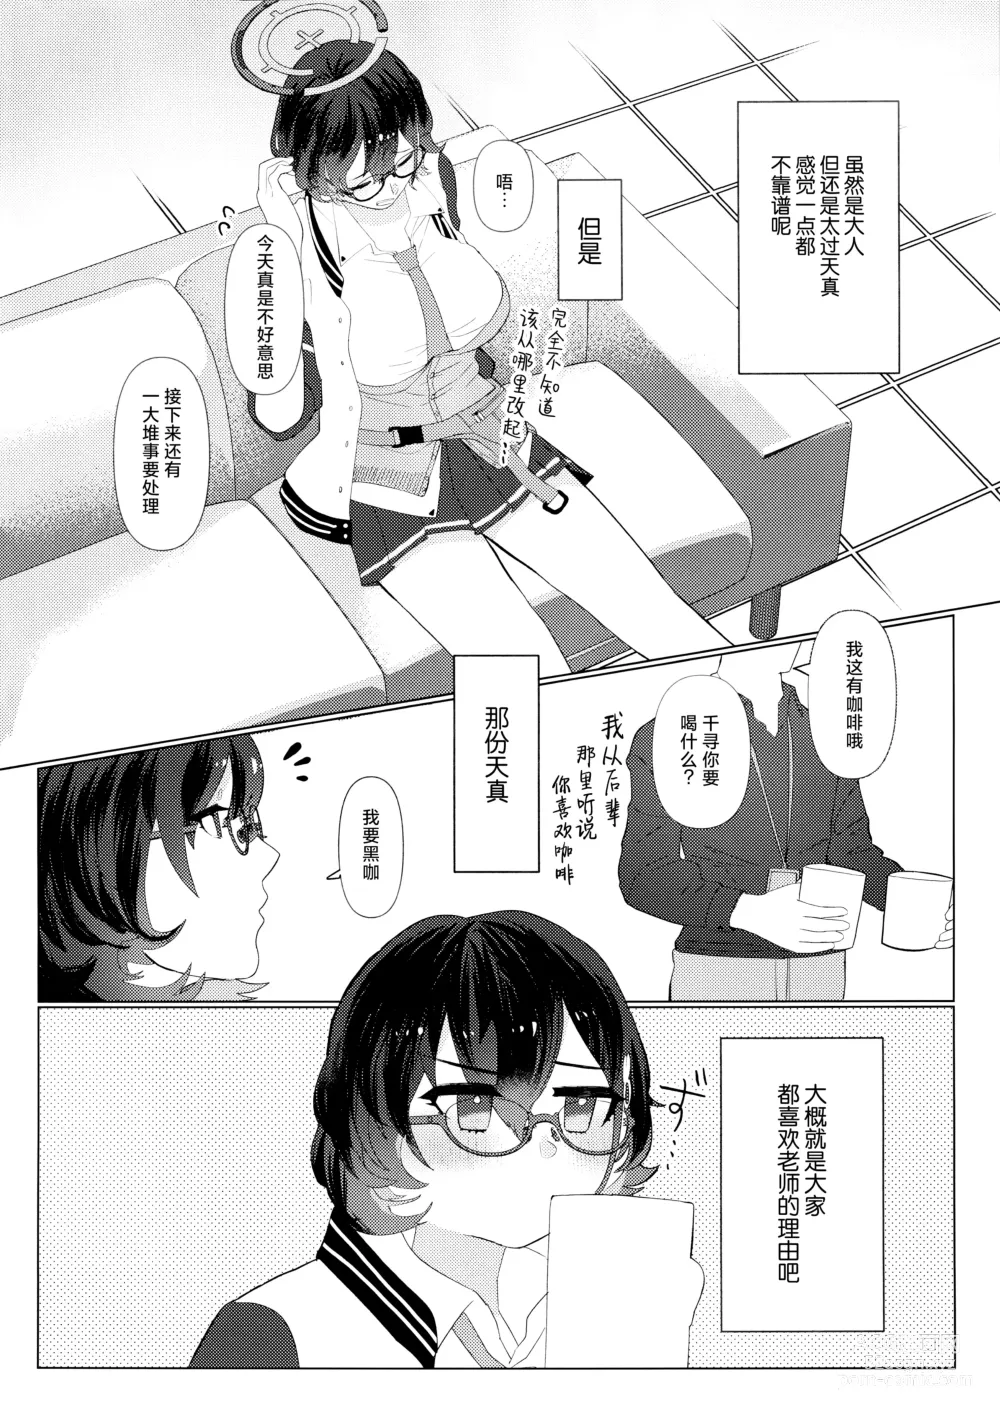 Page 5 of doujinshi 第一次的教学